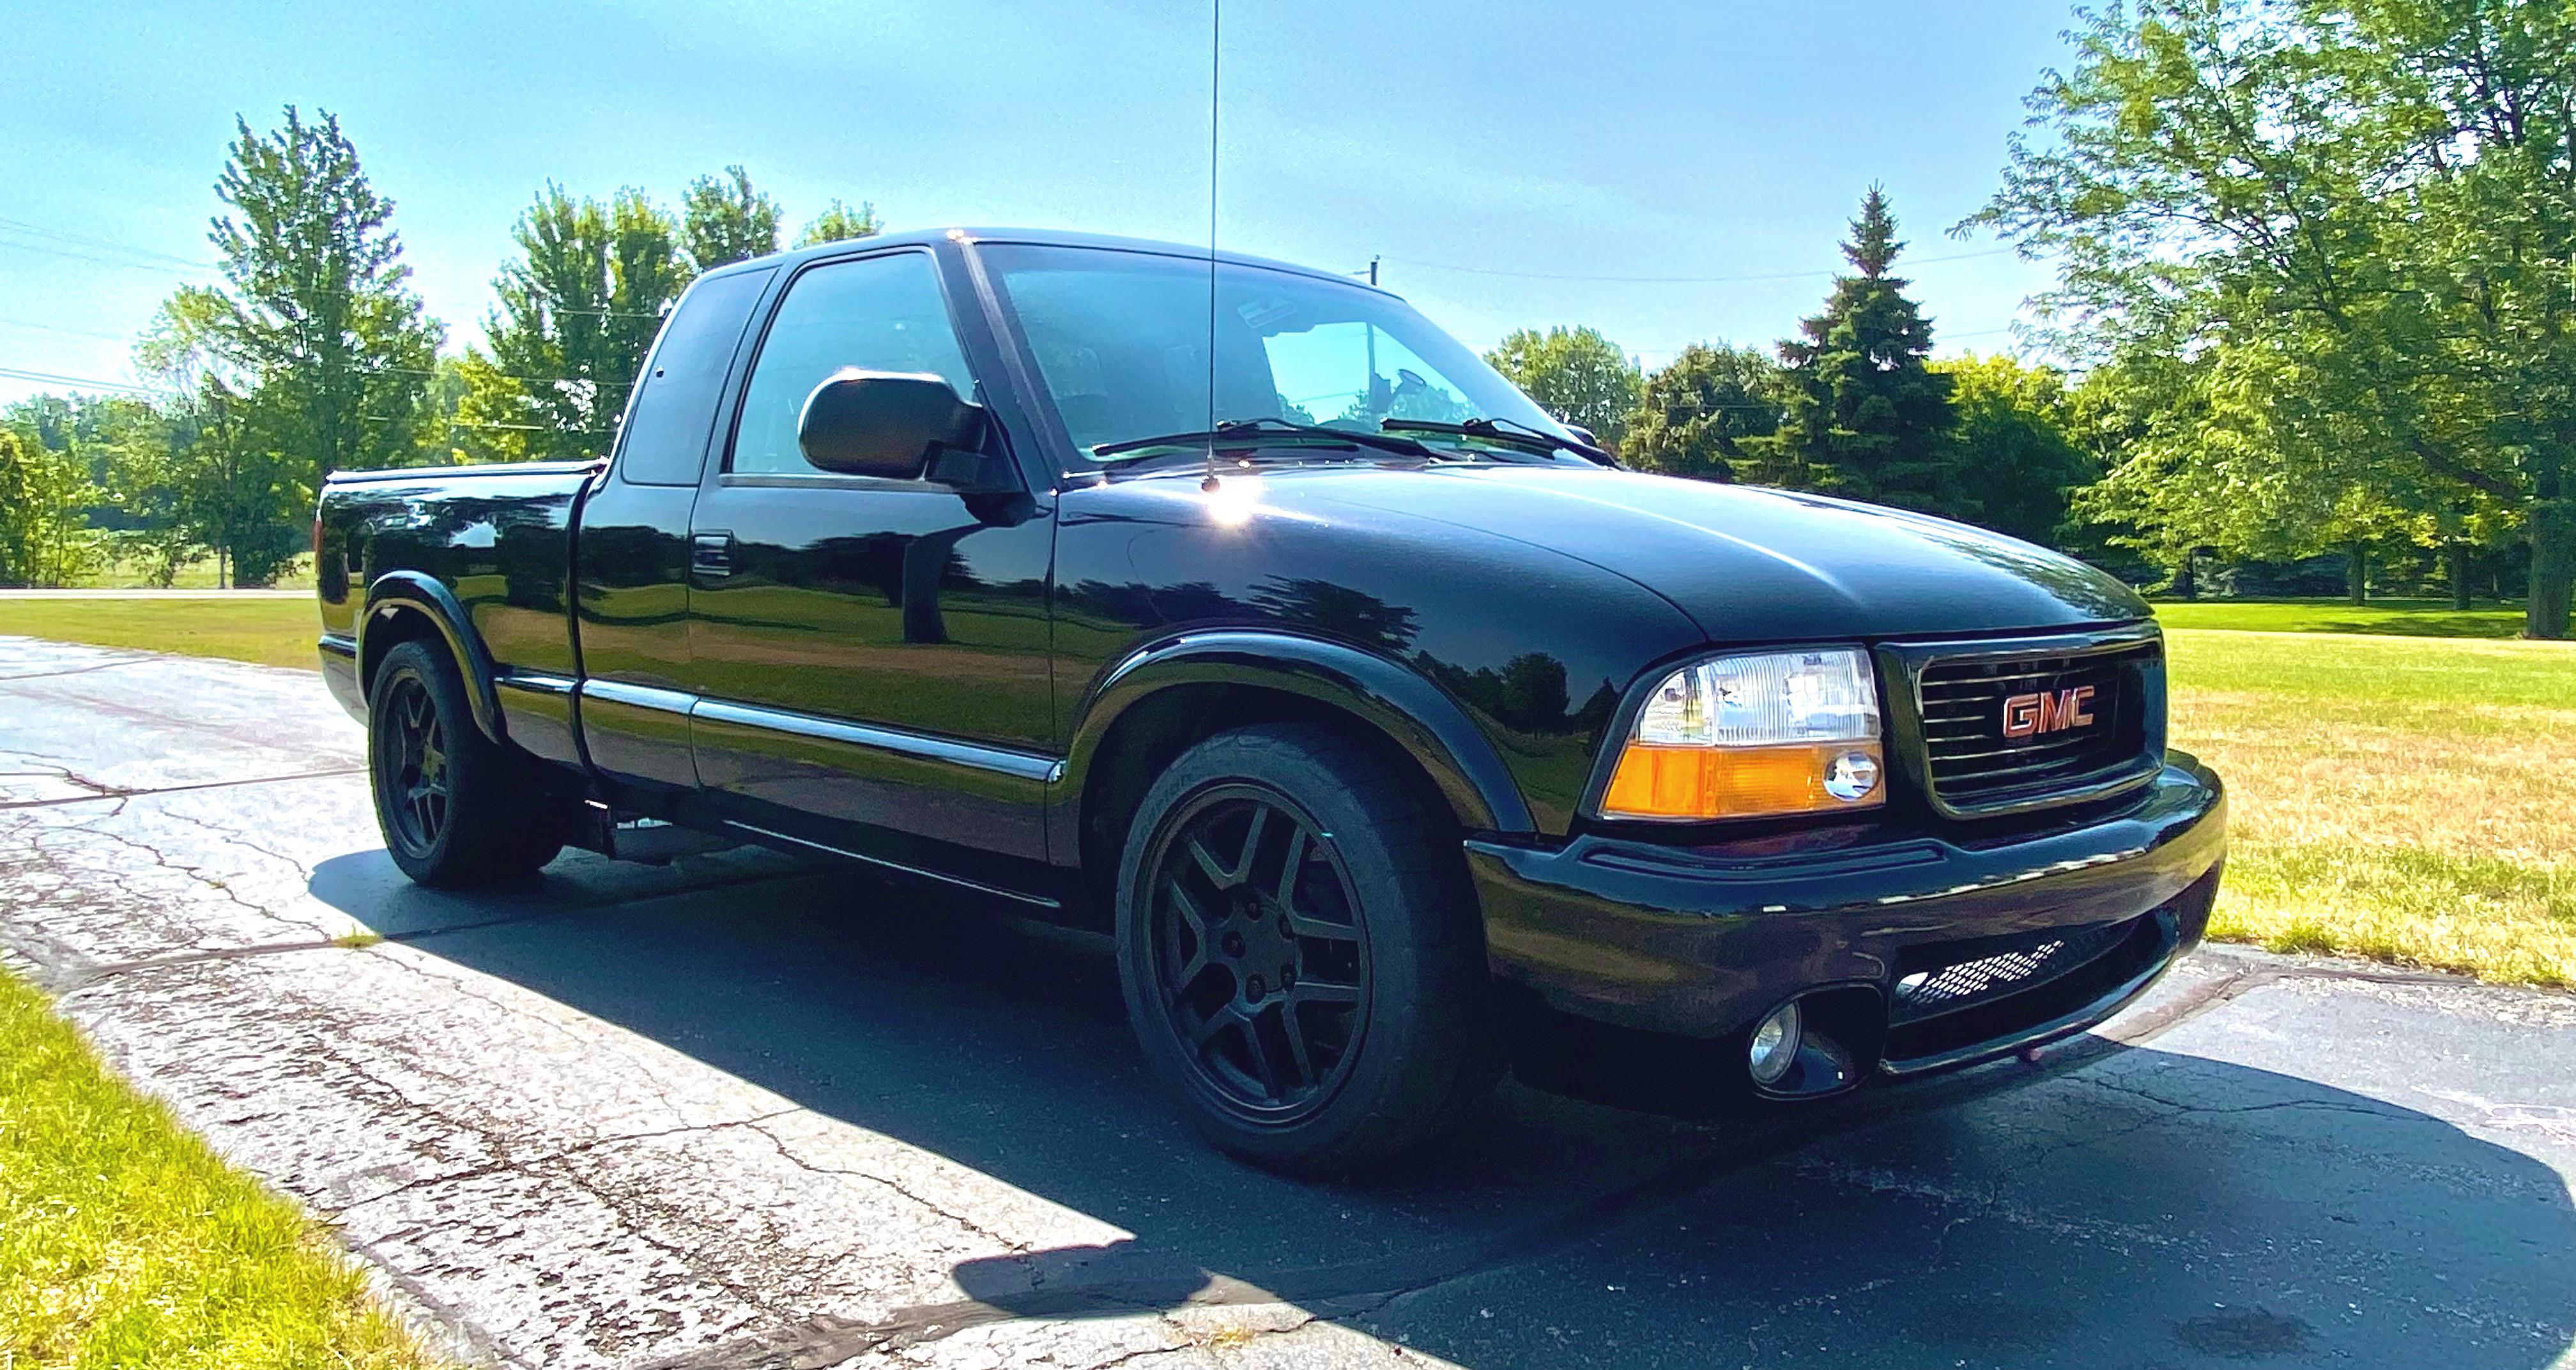 Here is my 1999 GMC Sonoma. 2003 Z06 LS6 under the hood, 4WD Blazer disc  rearend with an Eaton TrueTrac, C5 Z06 front brakes and an Hombre bed with  flared bedsides for